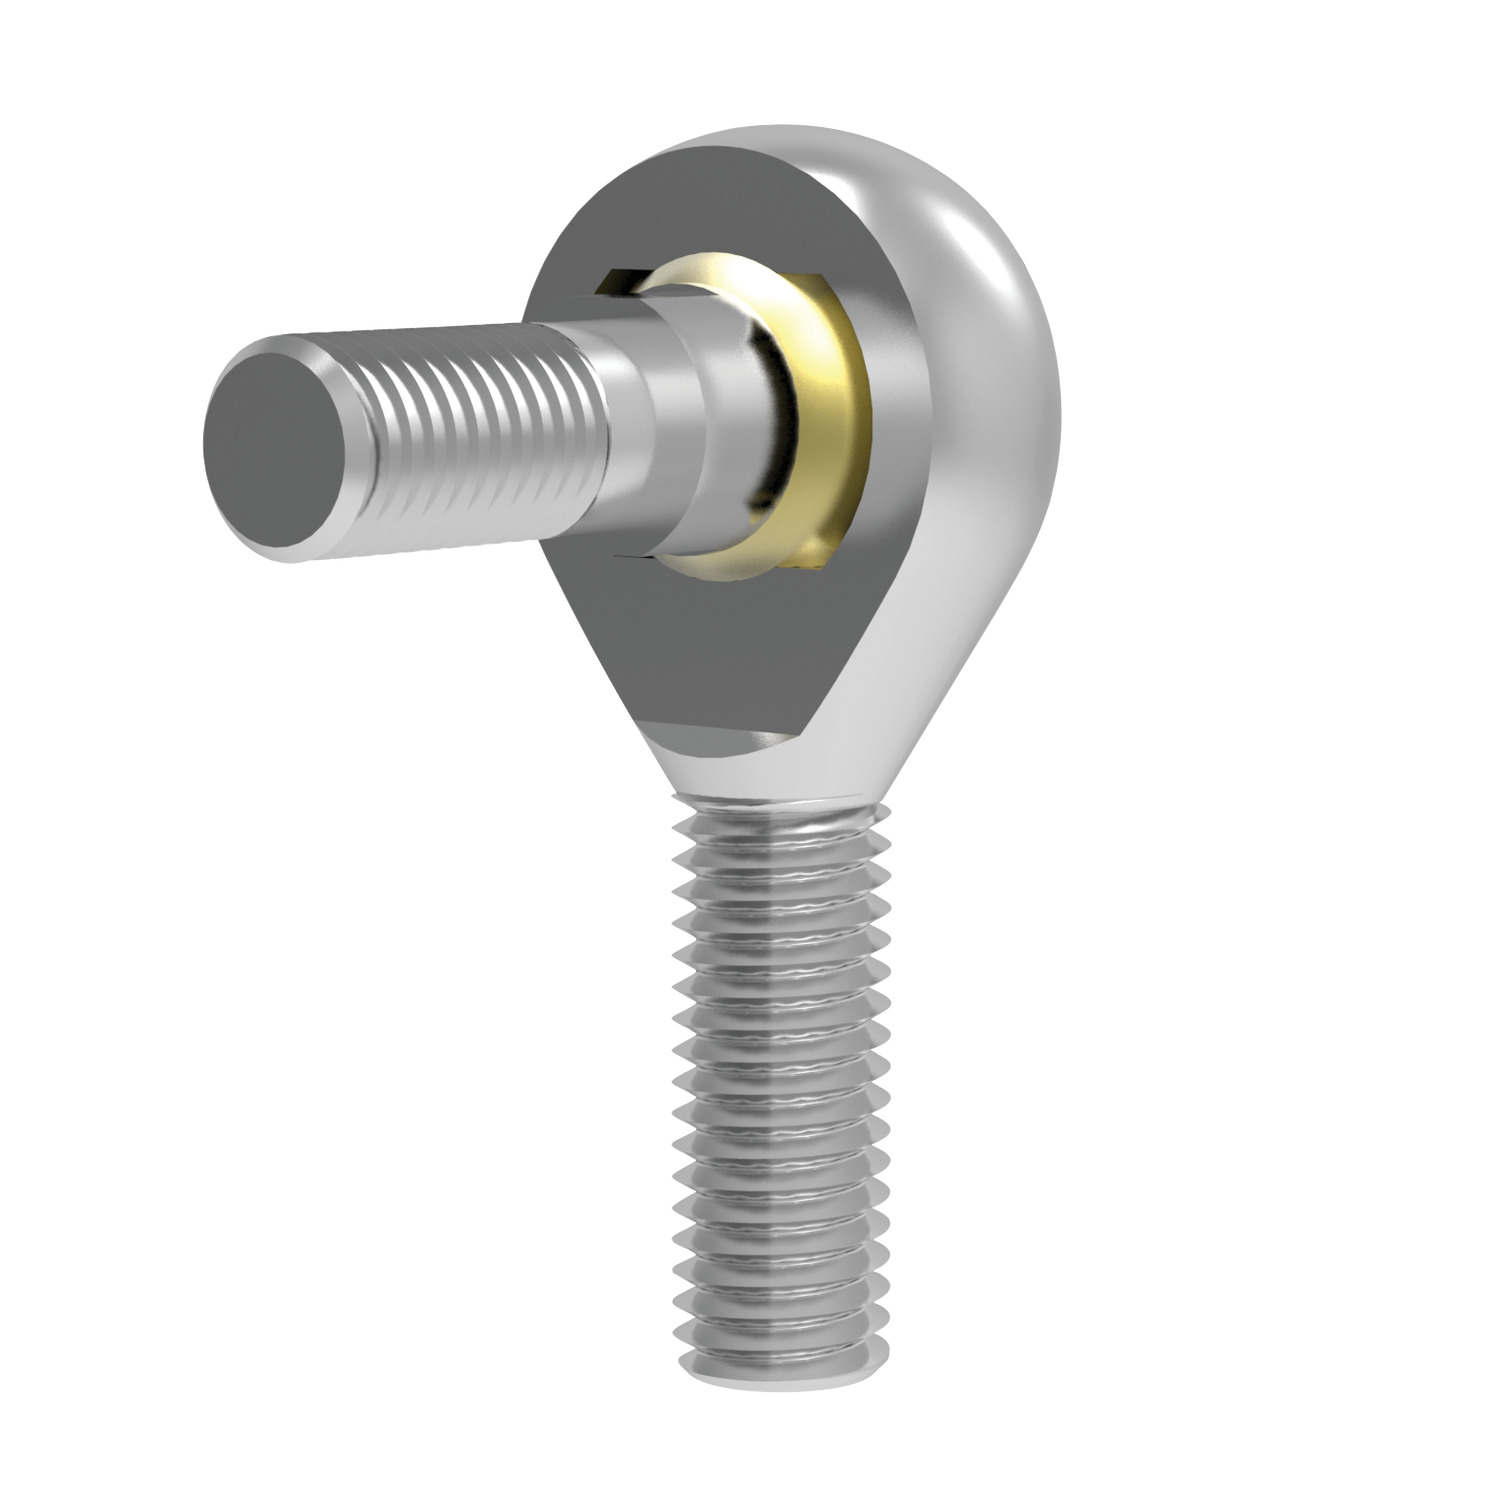 Rod End with Stud - Male Maintenance free, heavy duty male rod end with stud.